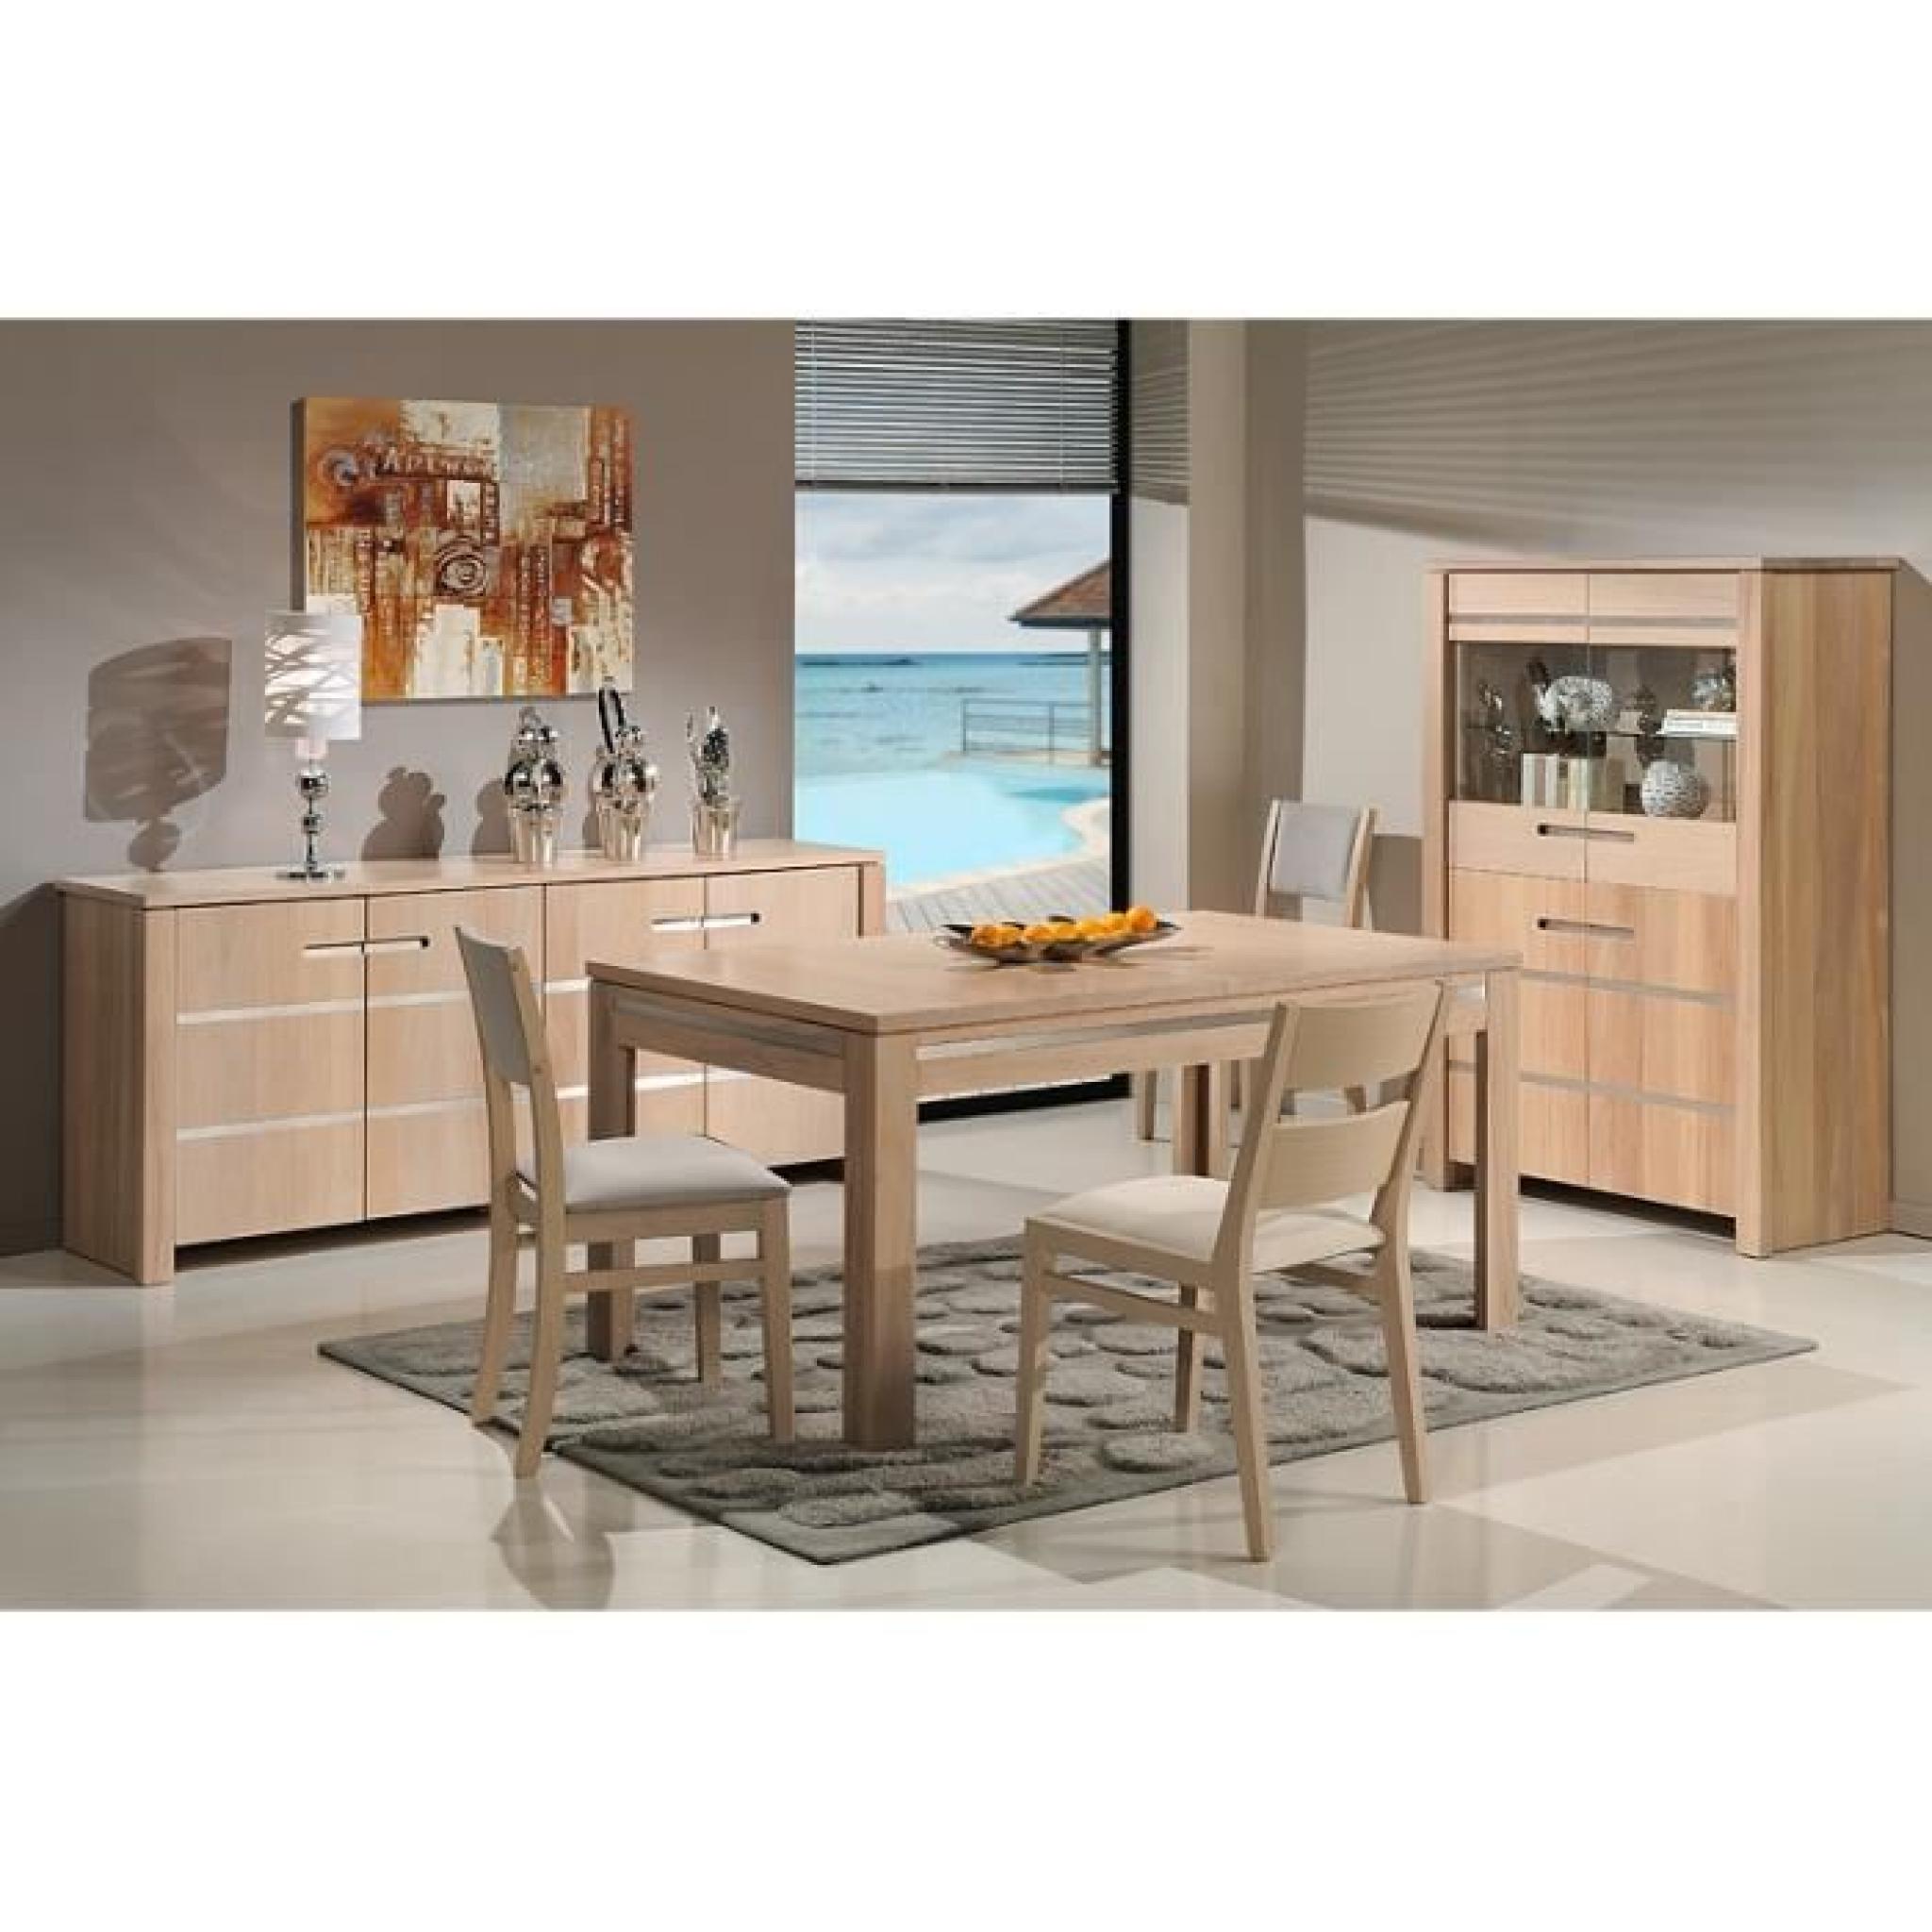 Table OPALE 180/95 ORME MASSIF-INOX (Orme - Gris) pas cher